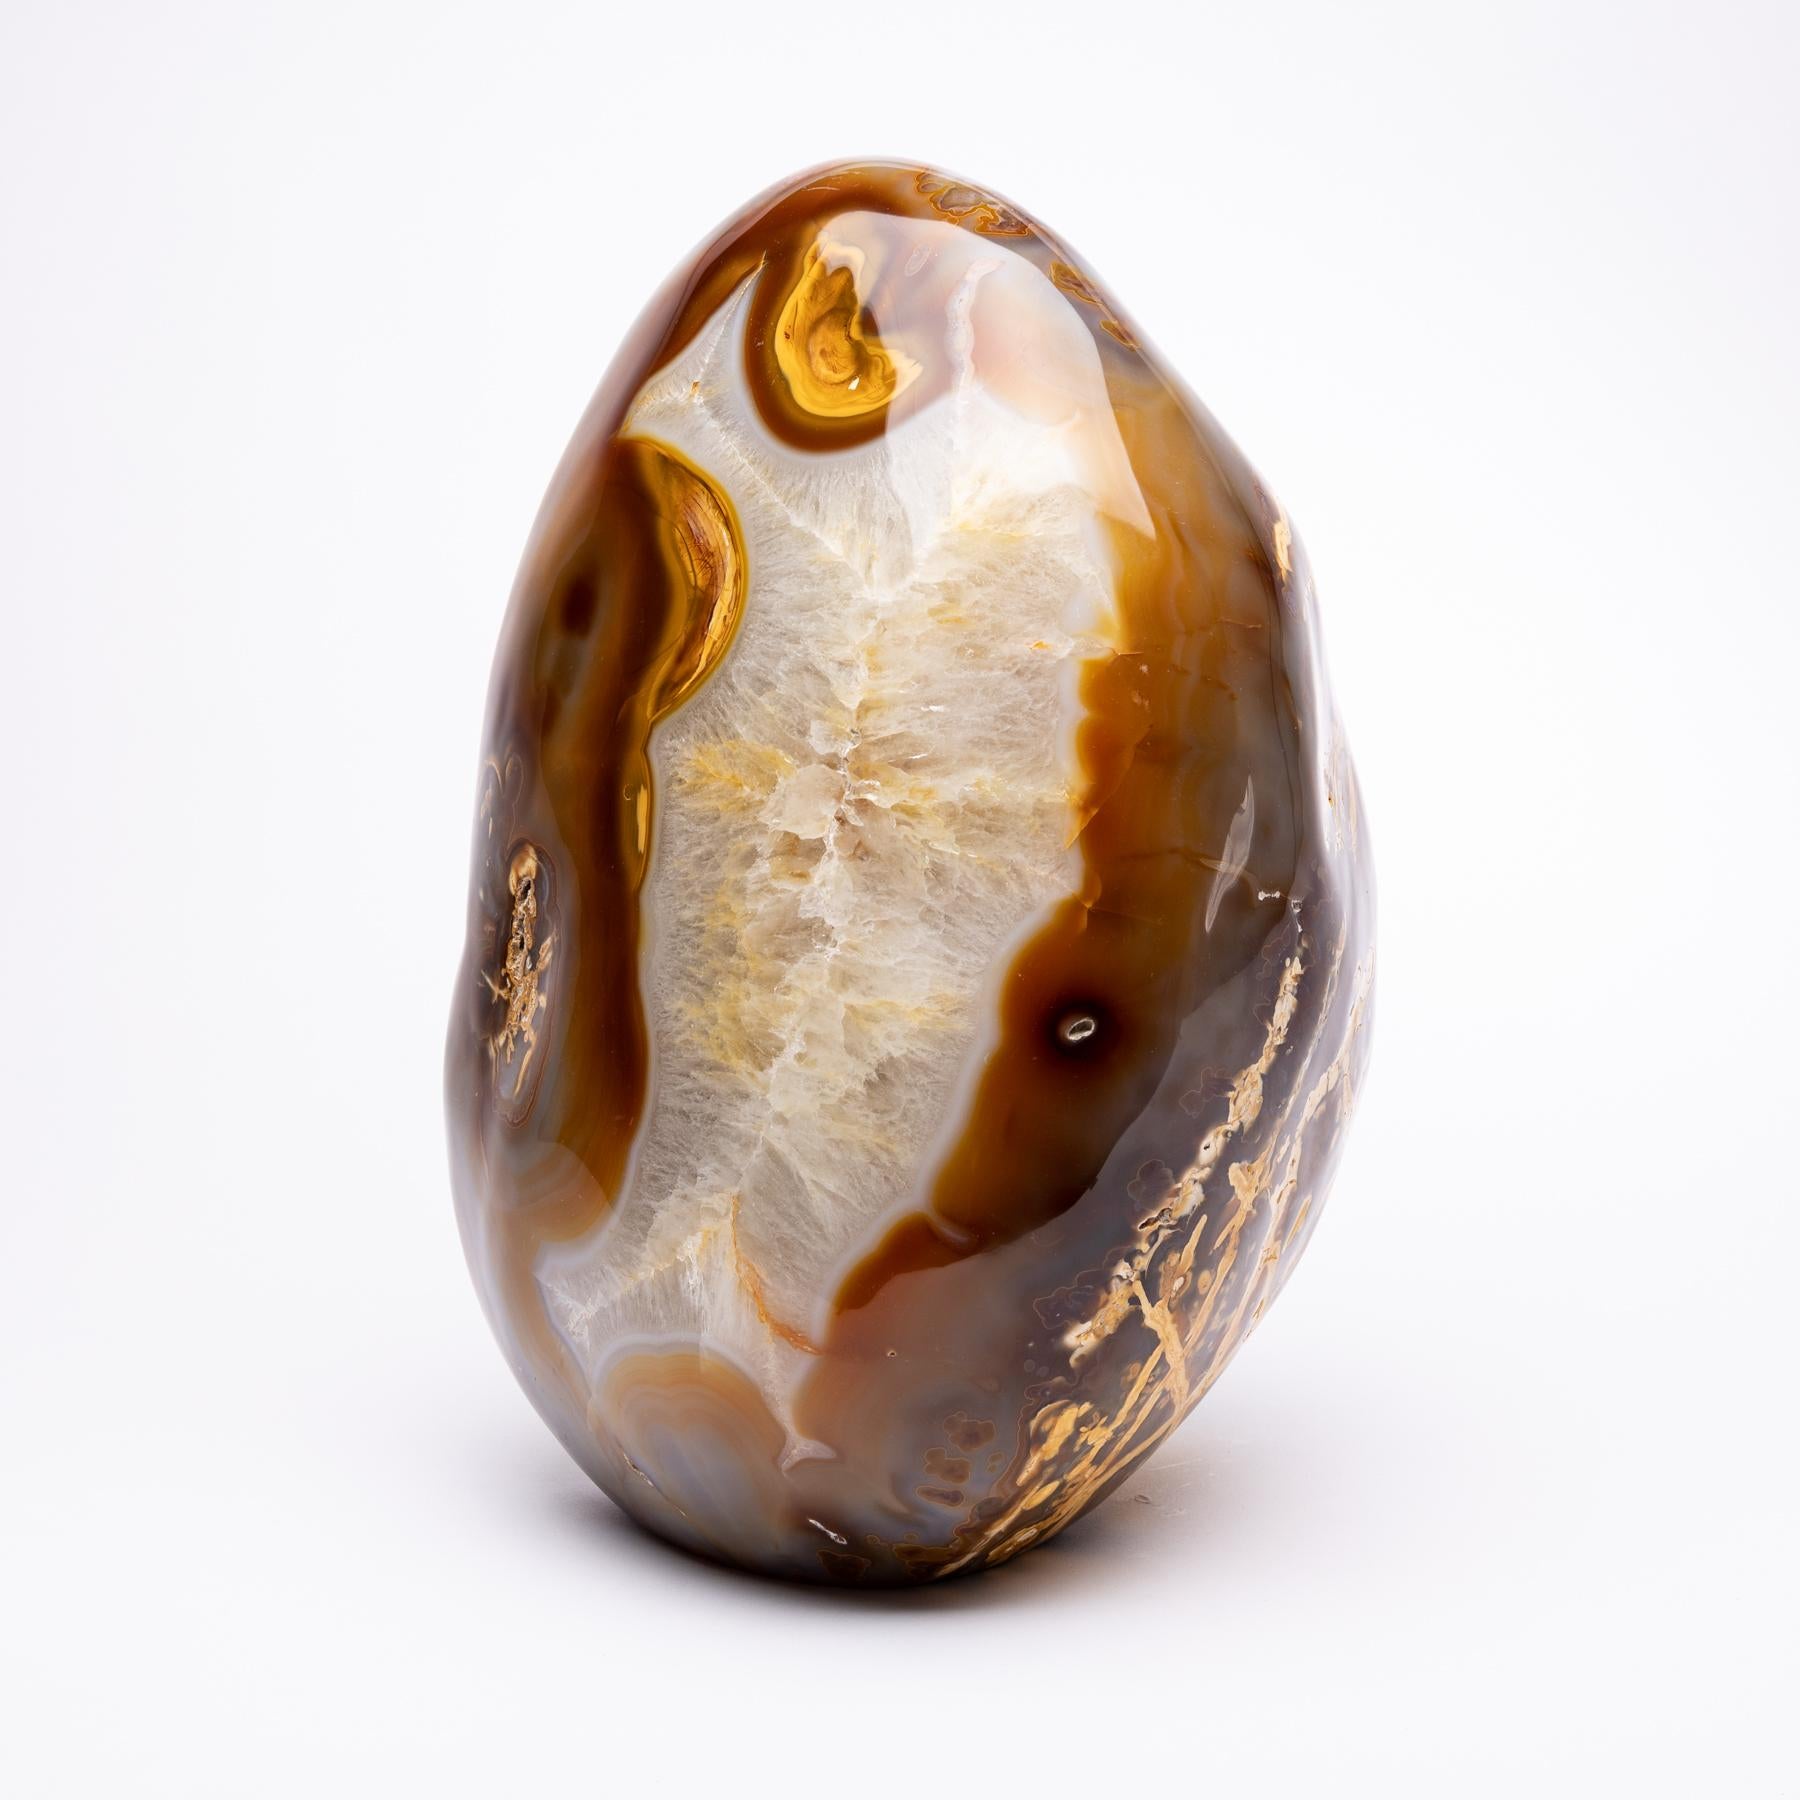 Origen: Madagascar,
Colors: White, brown, beige, honey
Agates are formed in rounded nodules, which are sliced open to bring out the internal pattern hidden in the stone. Their formation is commonly from depositions of layers of silica filling